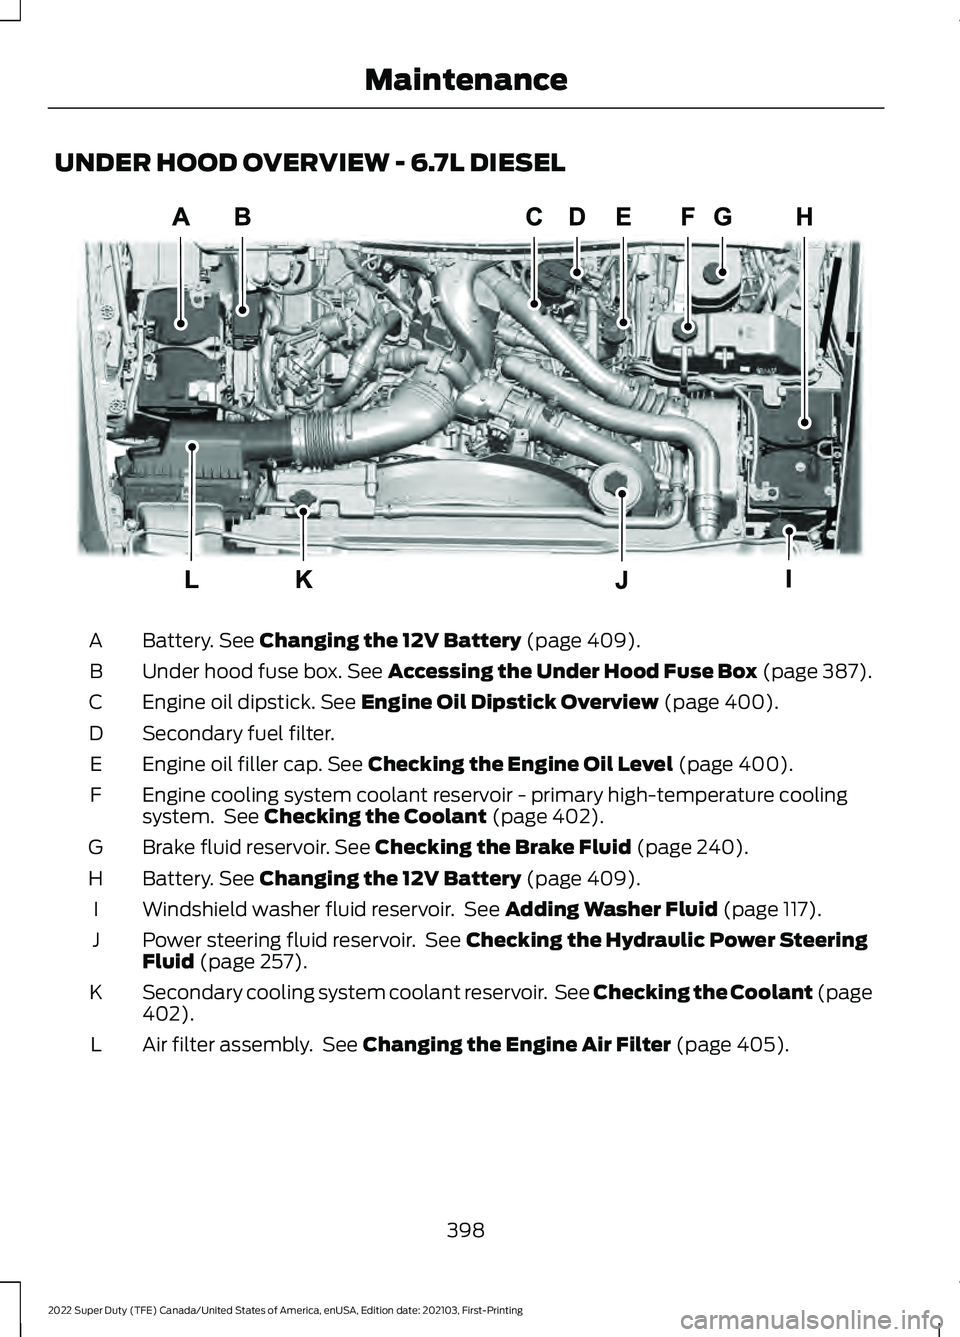 FORD F-350 2022  Owners Manual UNDER HOOD OVERVIEW - 6.7L DIESEL
Battery. See Changing the 12V Battery (page 409).
A
Under hood fuse box.
 See Accessing the Under Hood Fuse Box (page 387).
B
Engine oil dipstick.
 See Engine Oil Dip